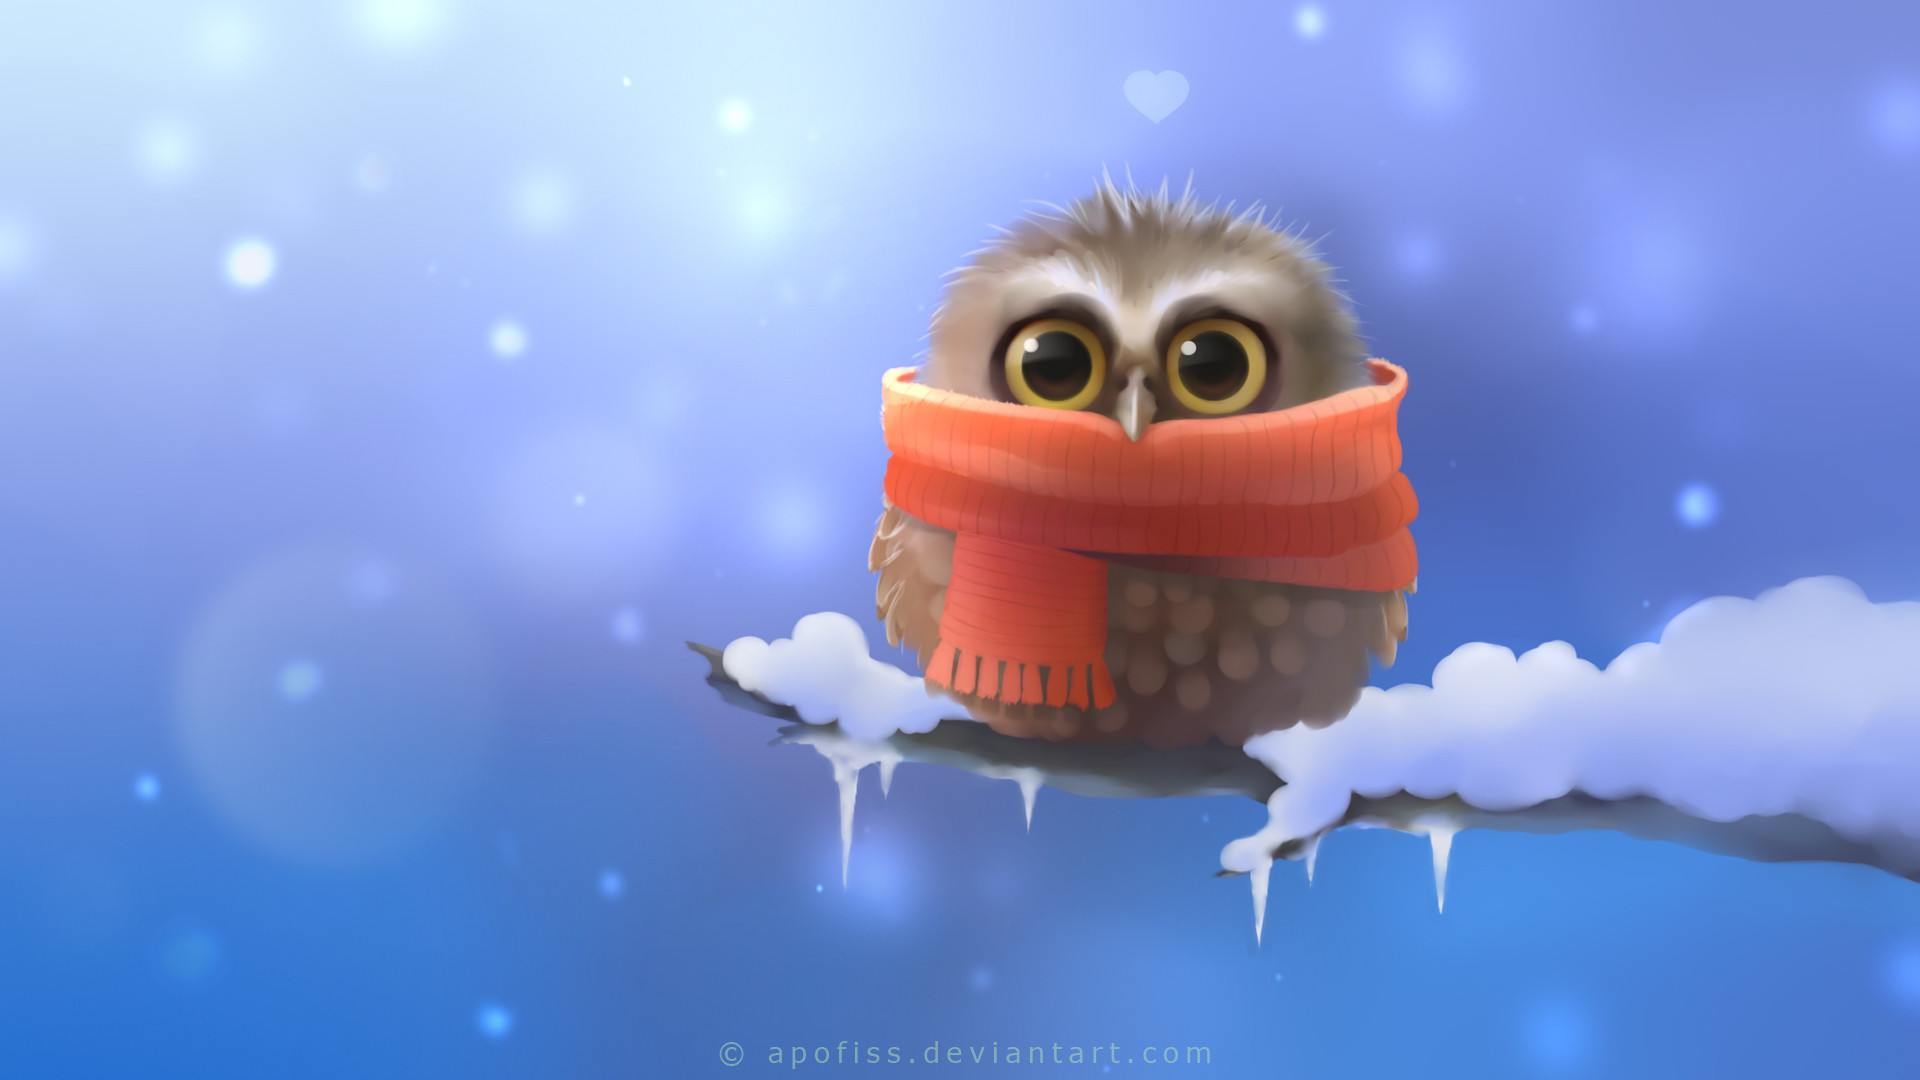 1920x1080 Cute Winter Backgrounds. Cute Owl Wallpapers | HD Wallpapers